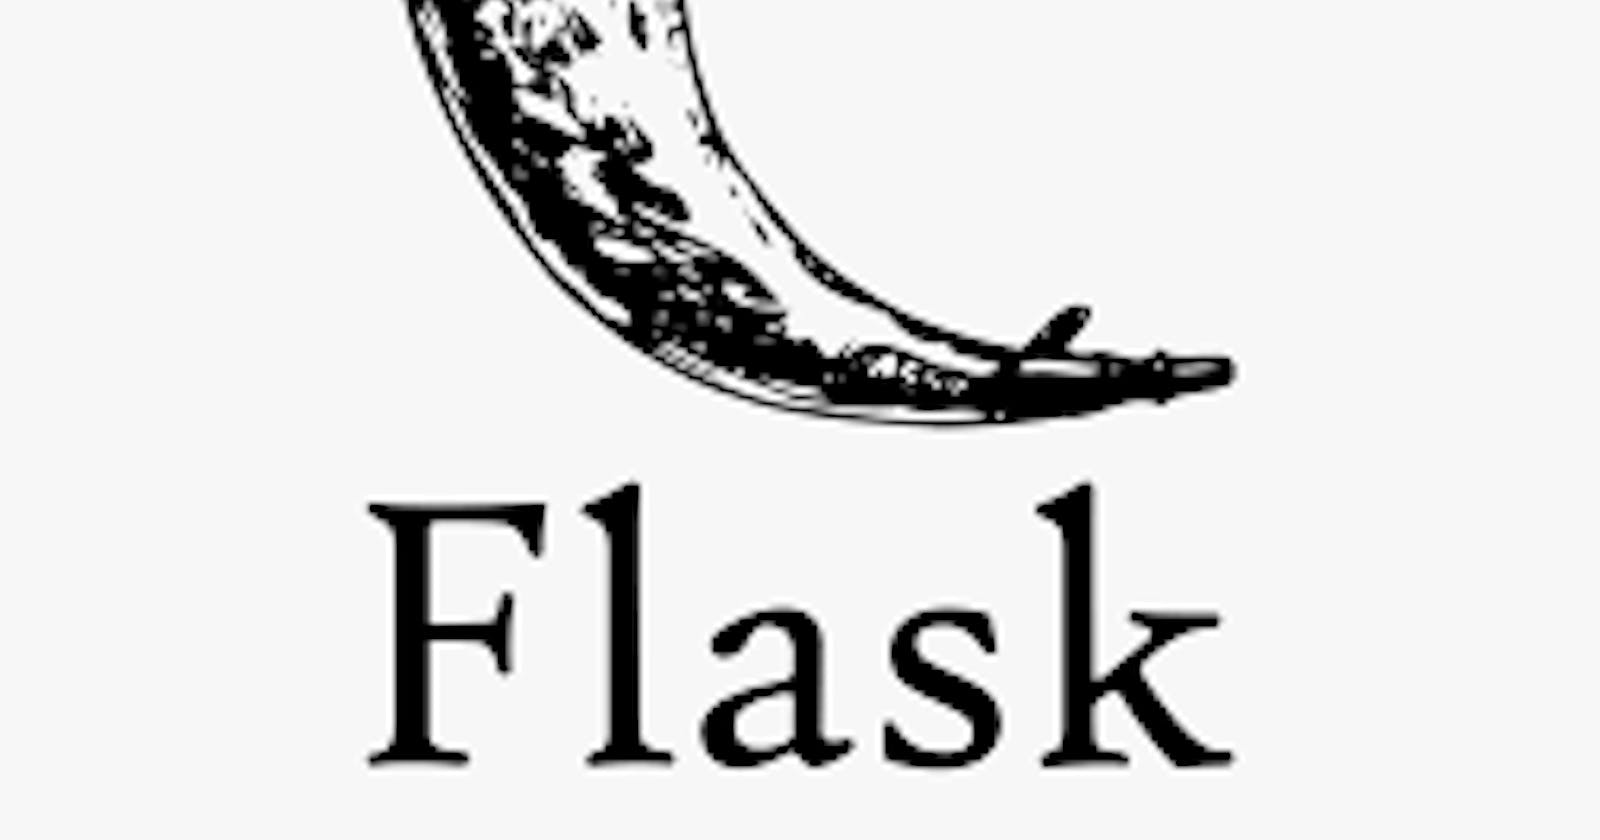 The hitchhiker's guide to building a React +  Flask web app (part1).